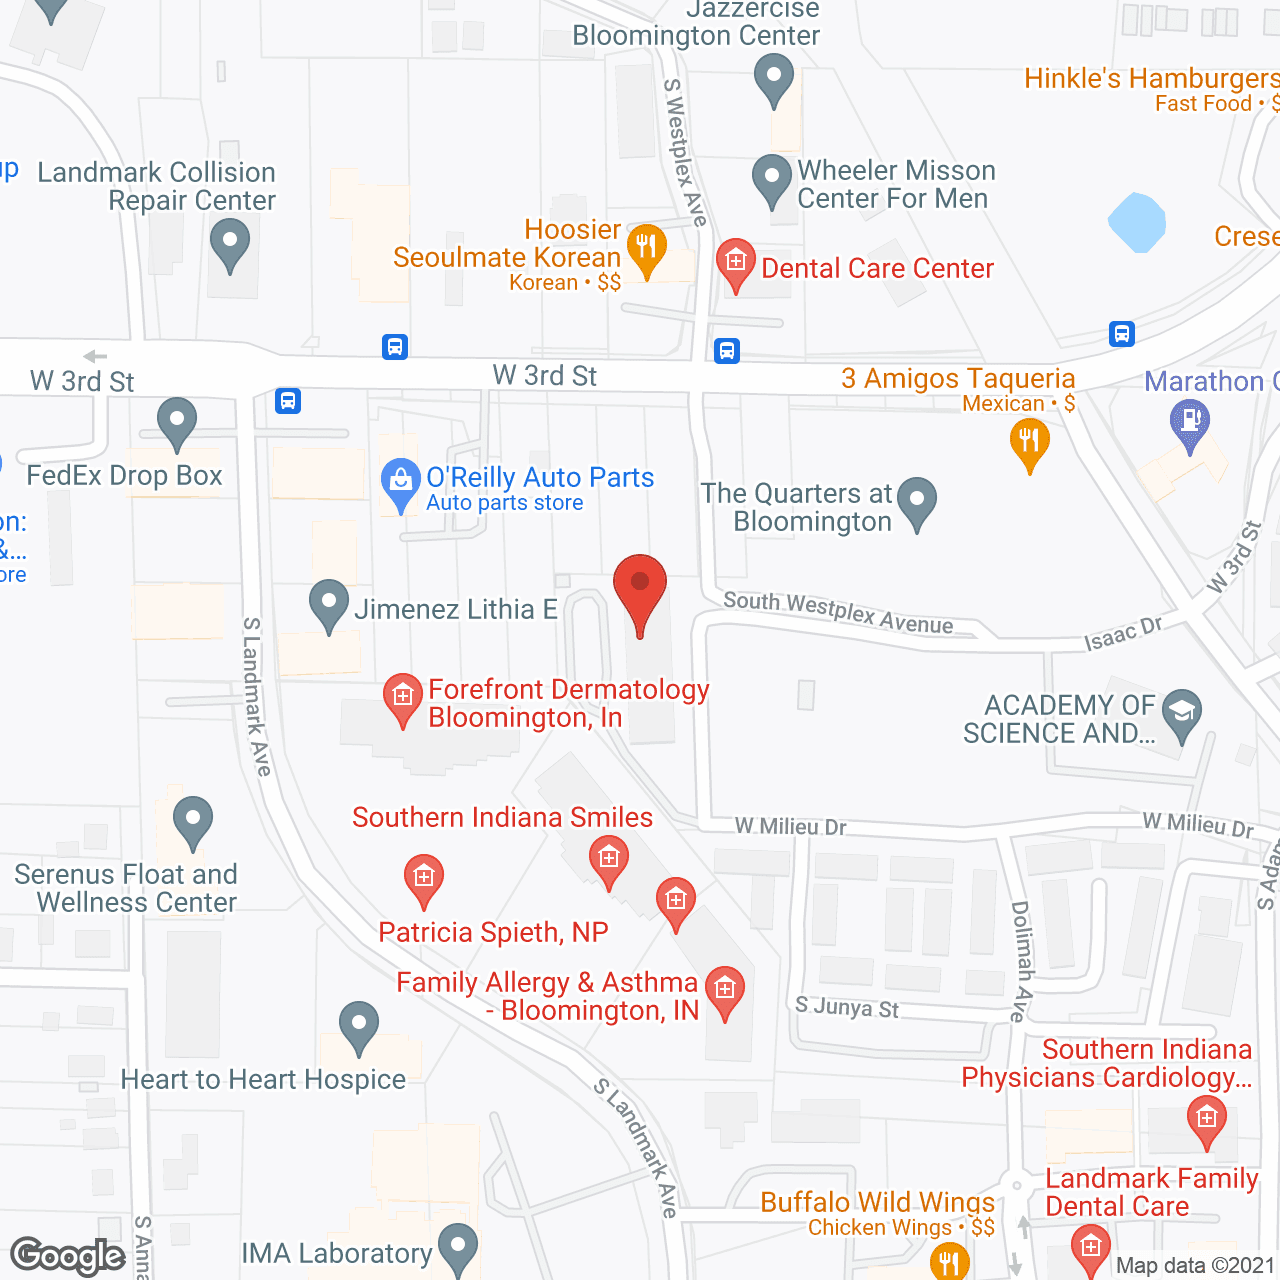 Patterson Pointe Senior Residence in google map